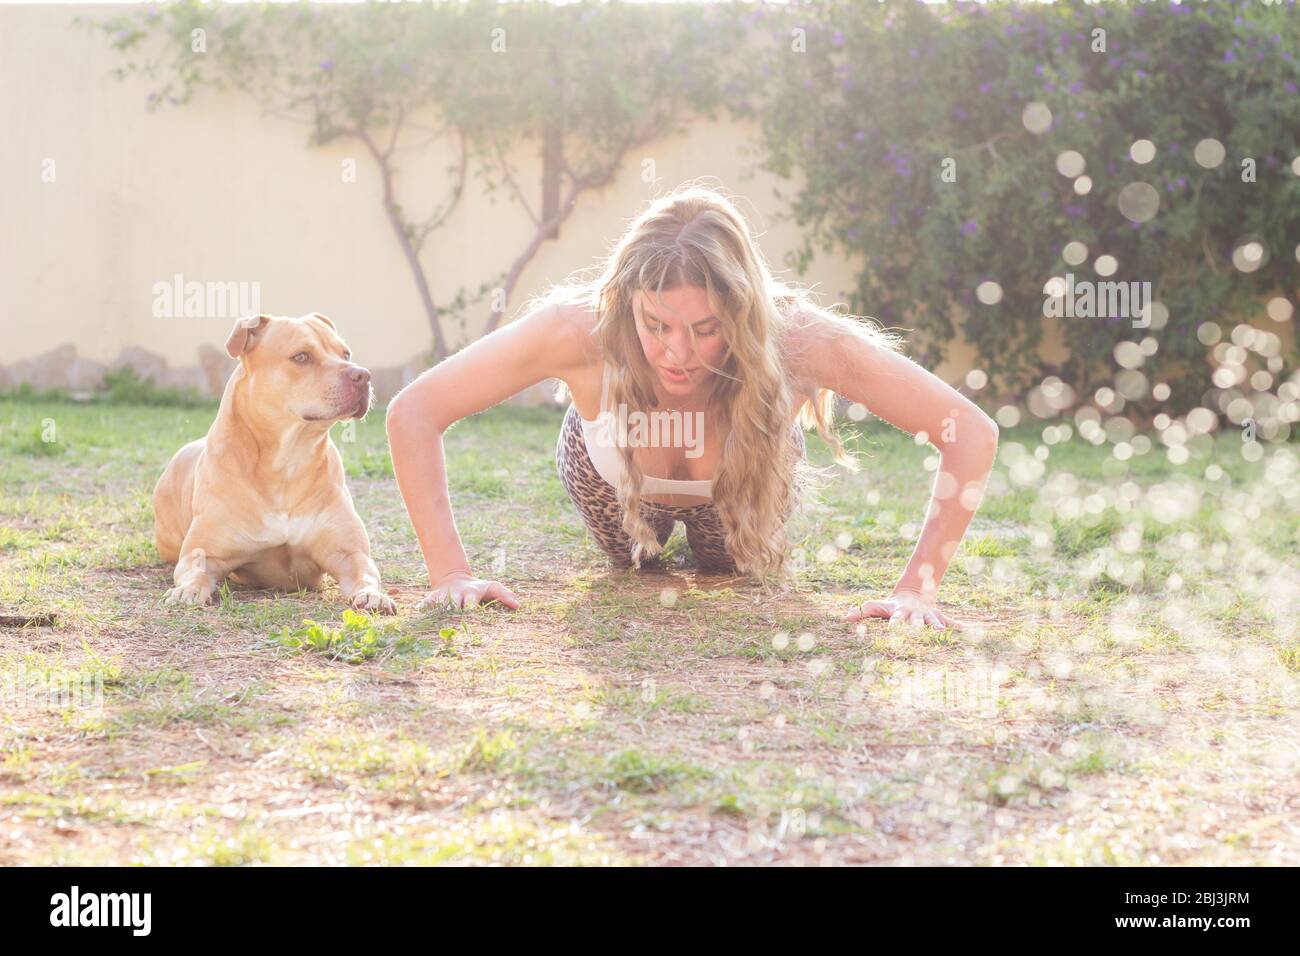 Young woman workout exercising with her dog outdoors Stock Photo